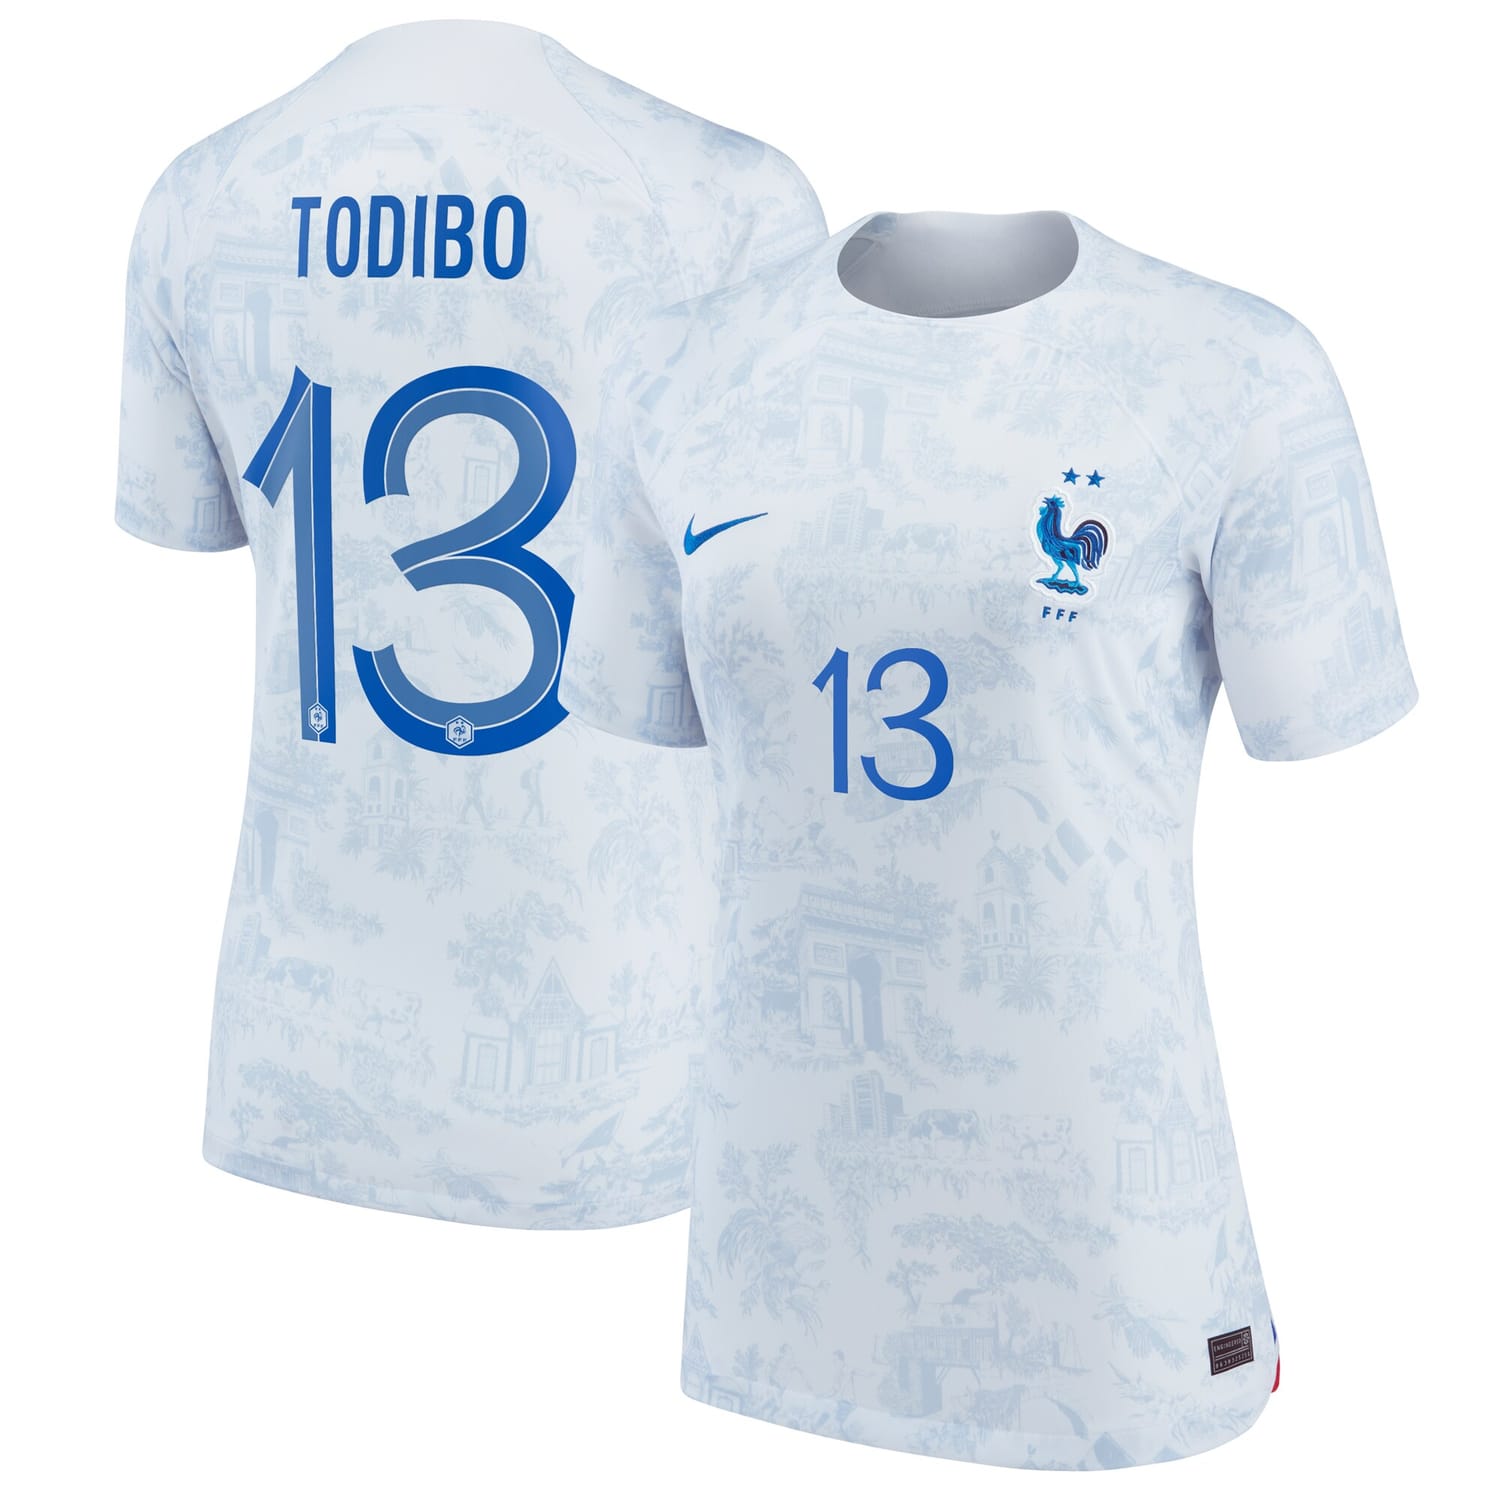 France National Team Away Jersey Shirt 2022 player Jean-Clair Todibo 13 printing for Women